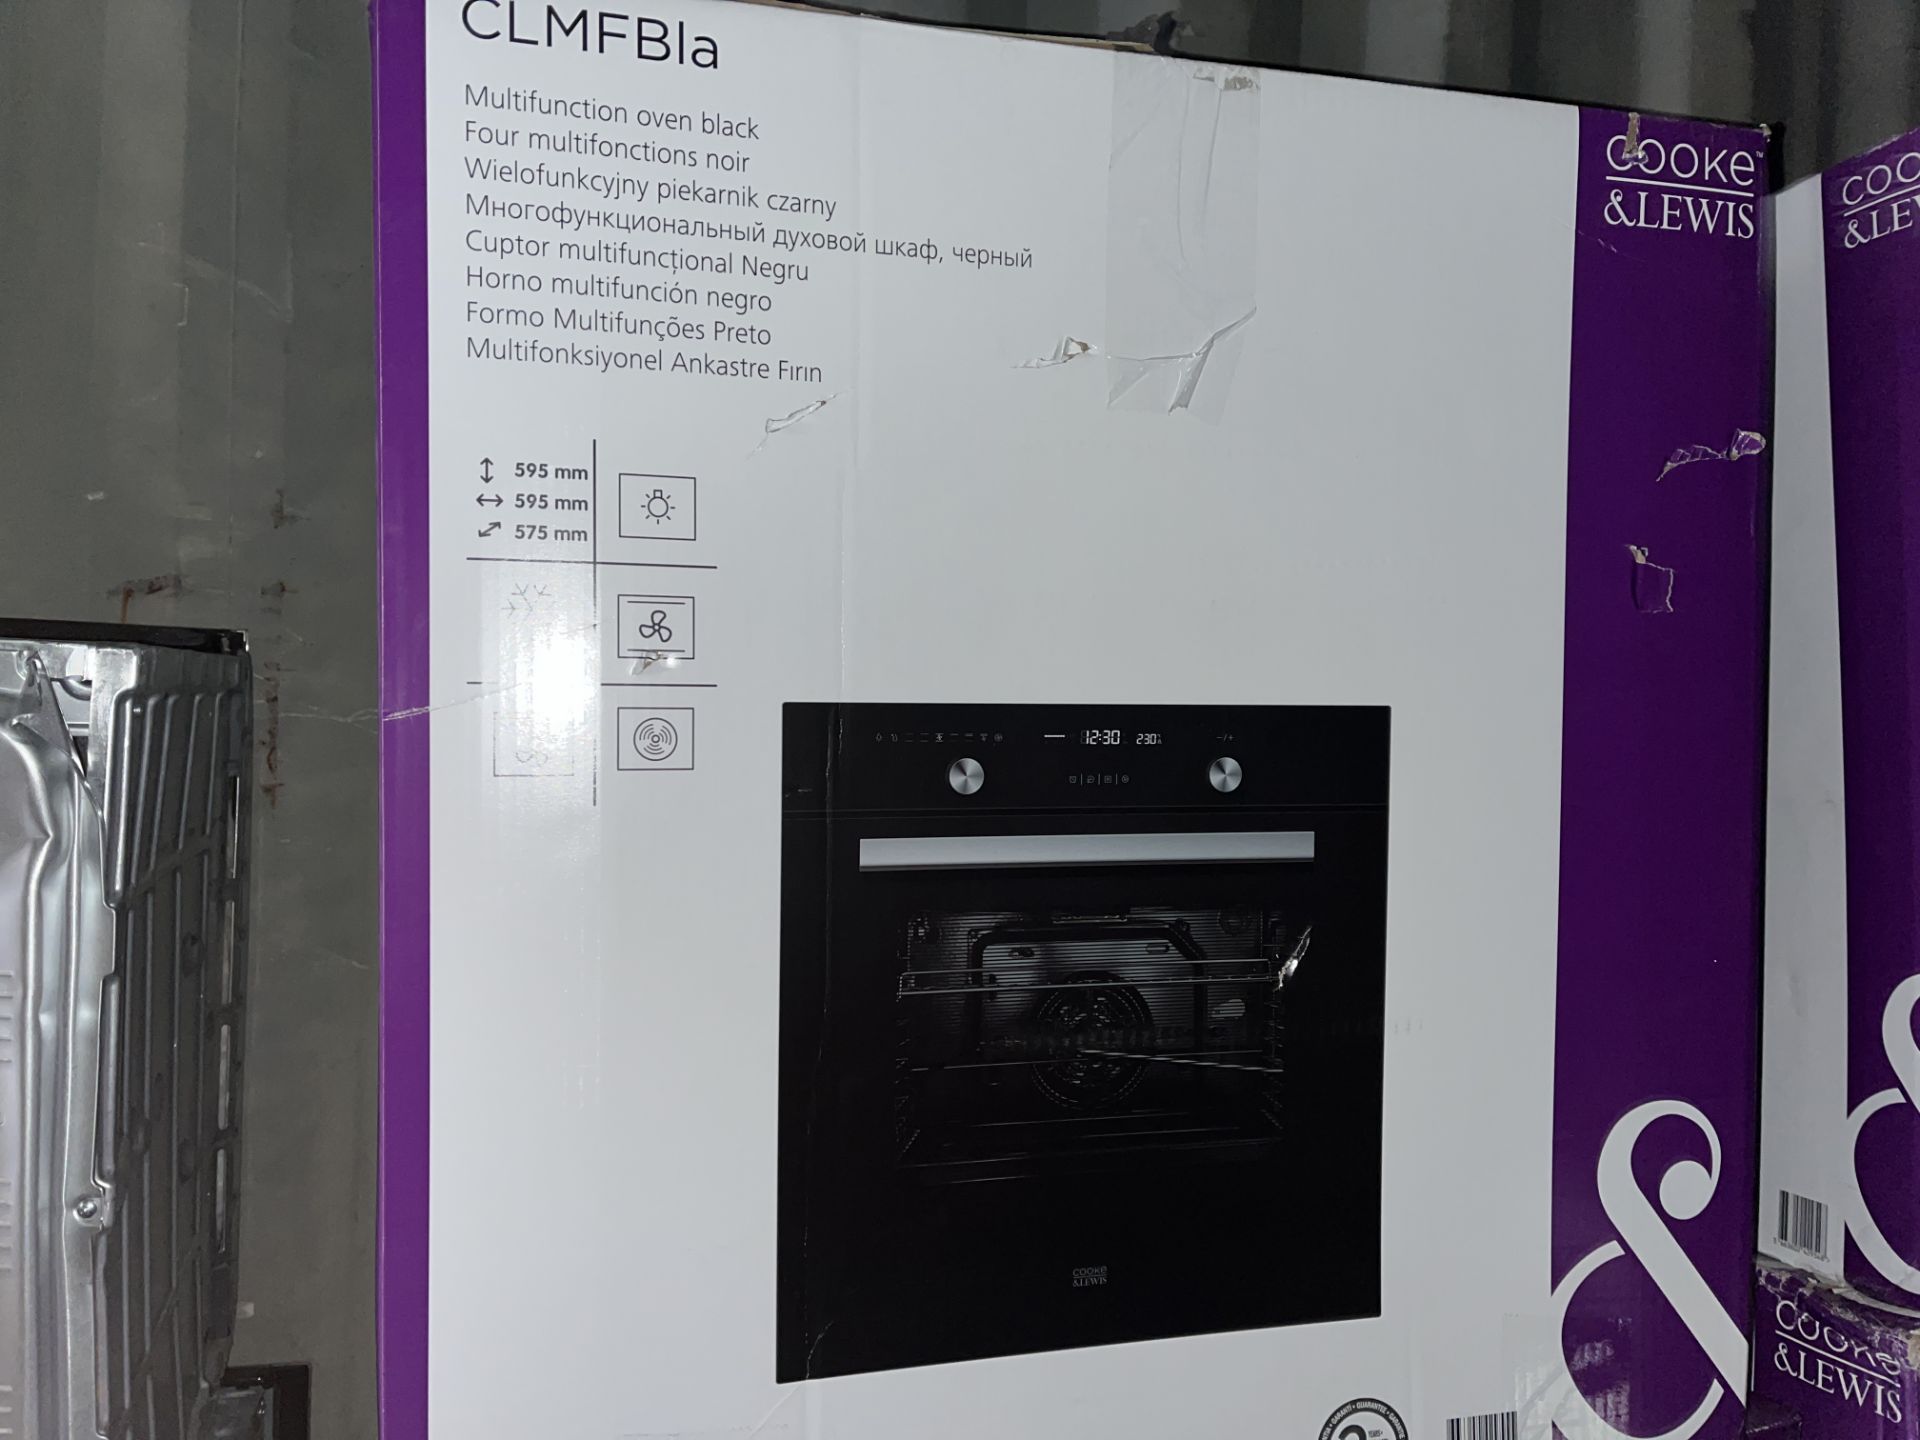 BOXED CONVECTION OVEN CLMFBLA (UNCHECKED, UNTESTED)